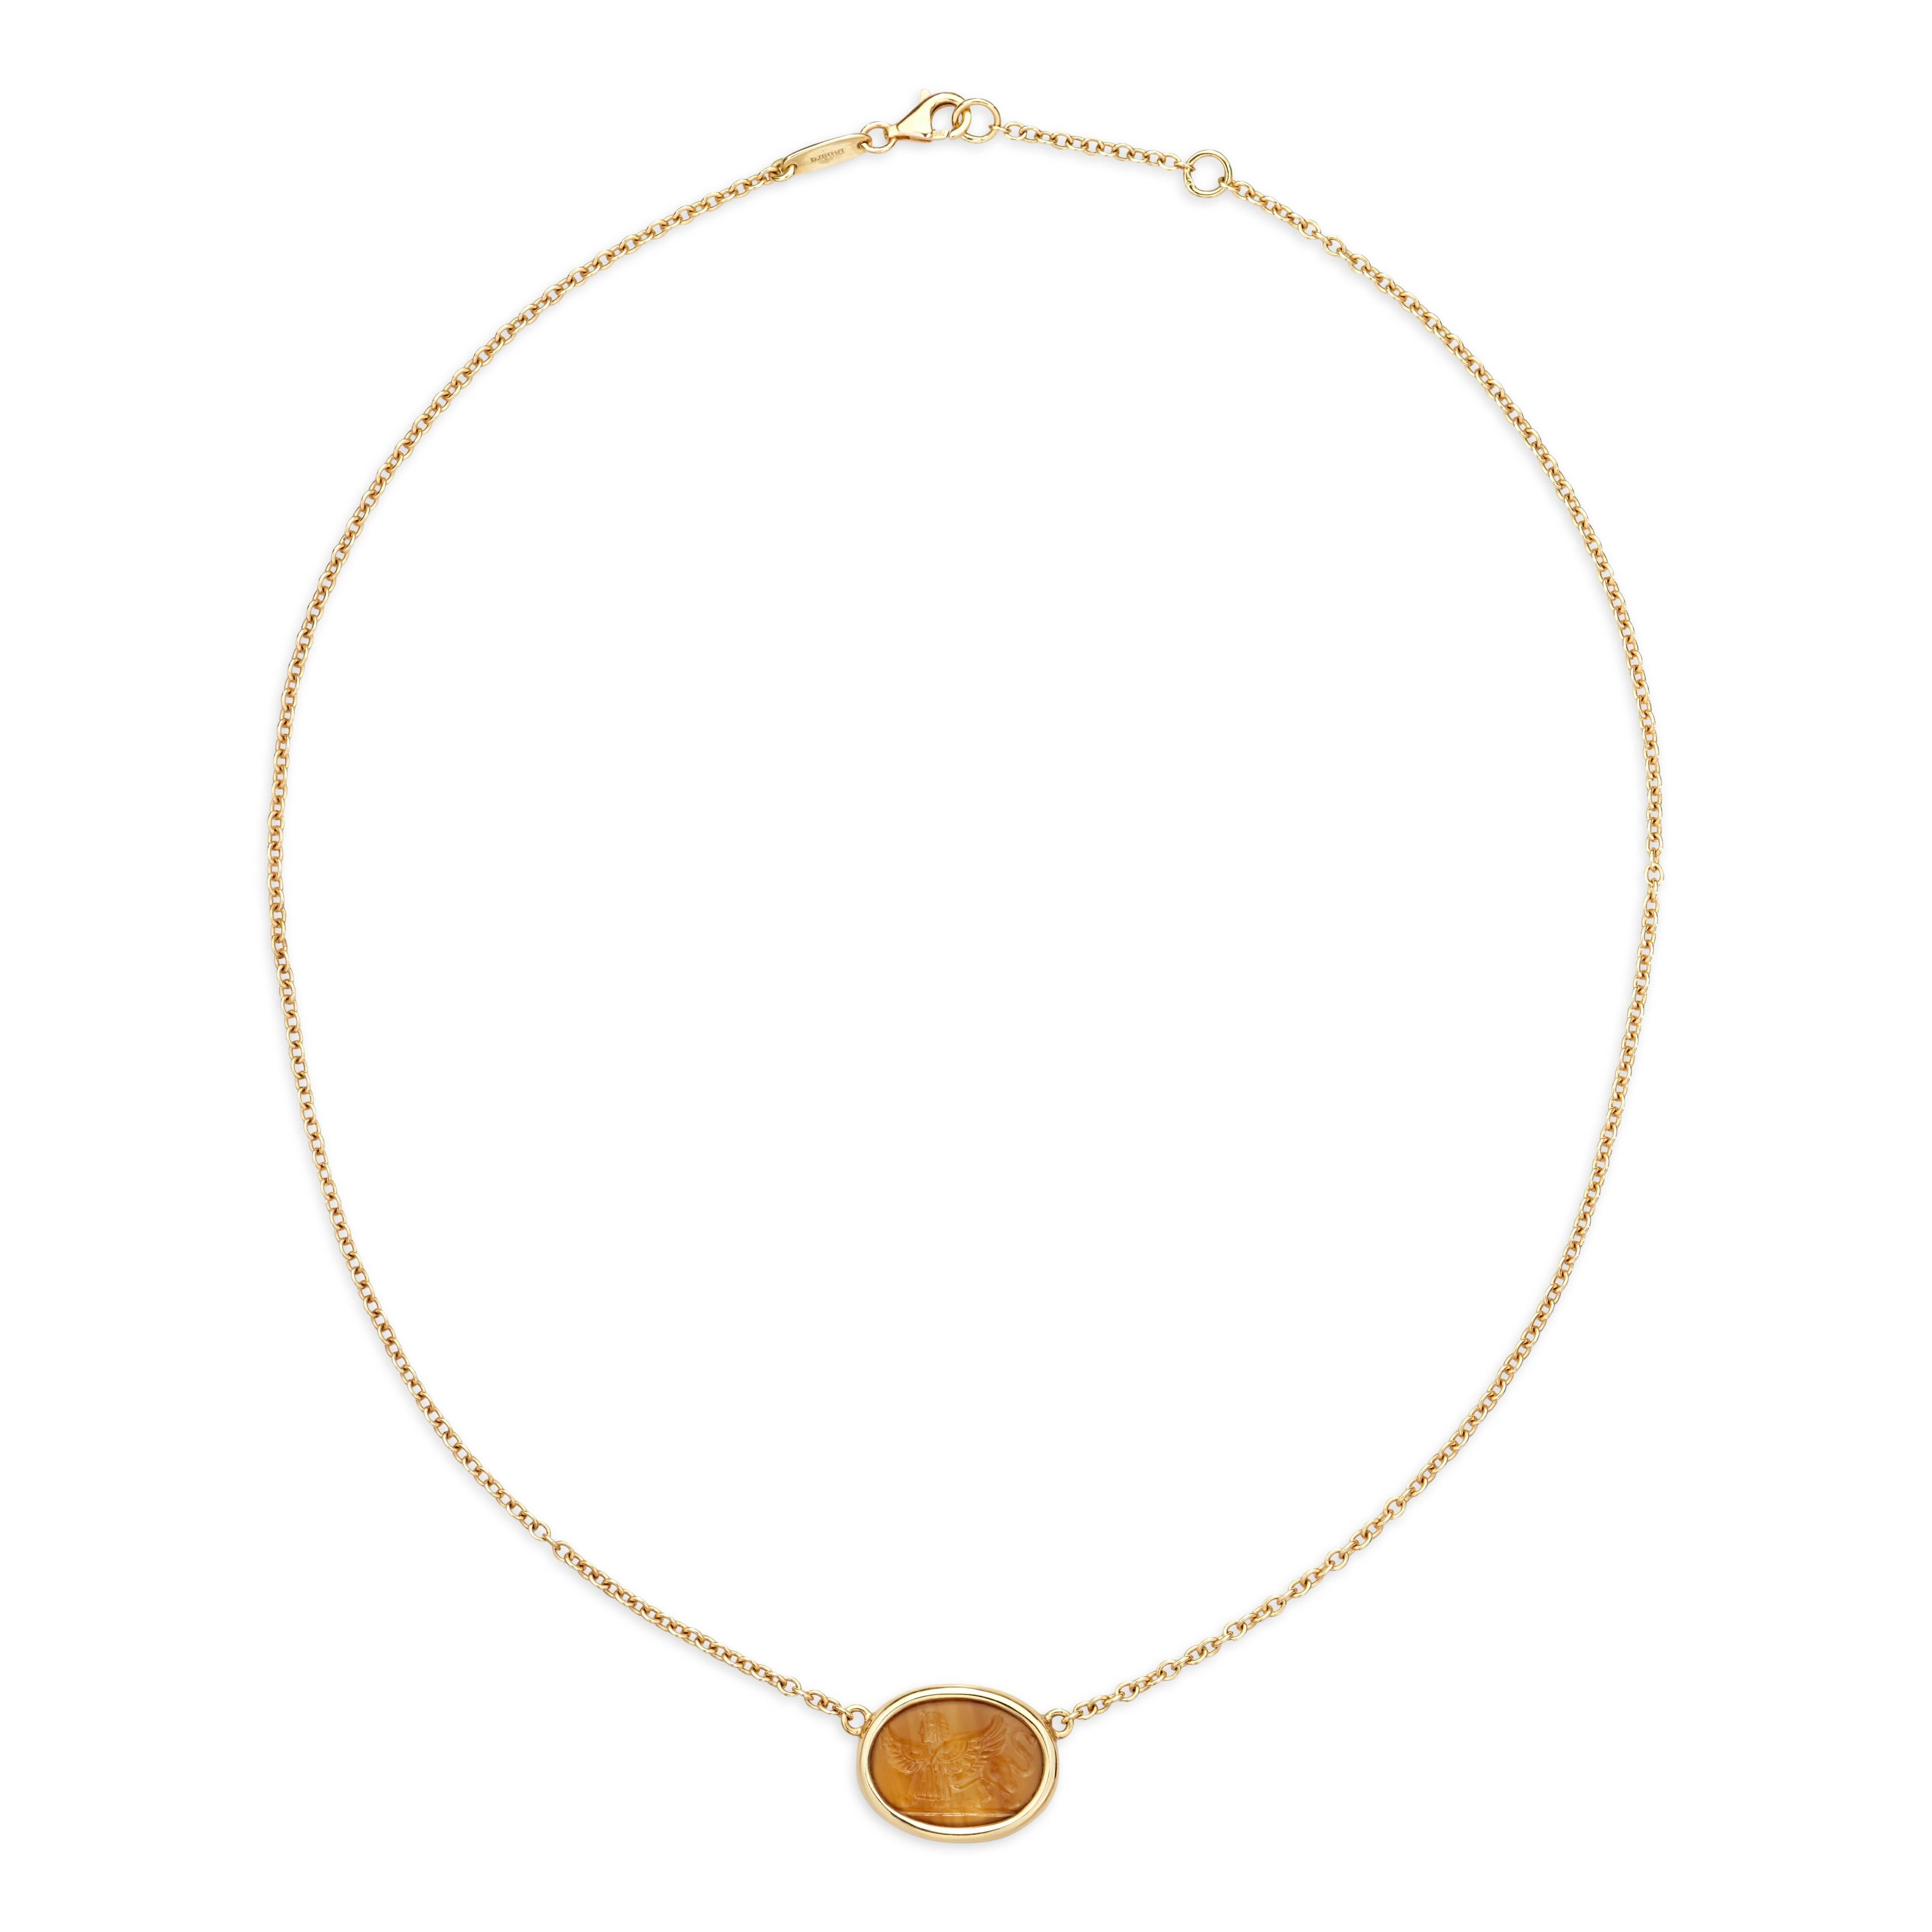 This DUBINI coin necklace from the 'Empires' collection features an authentic Sphinx agate intaglio circa 19th century set in 18k yellow gold.

Rolo chain: 41cm with an adjustable hoop at